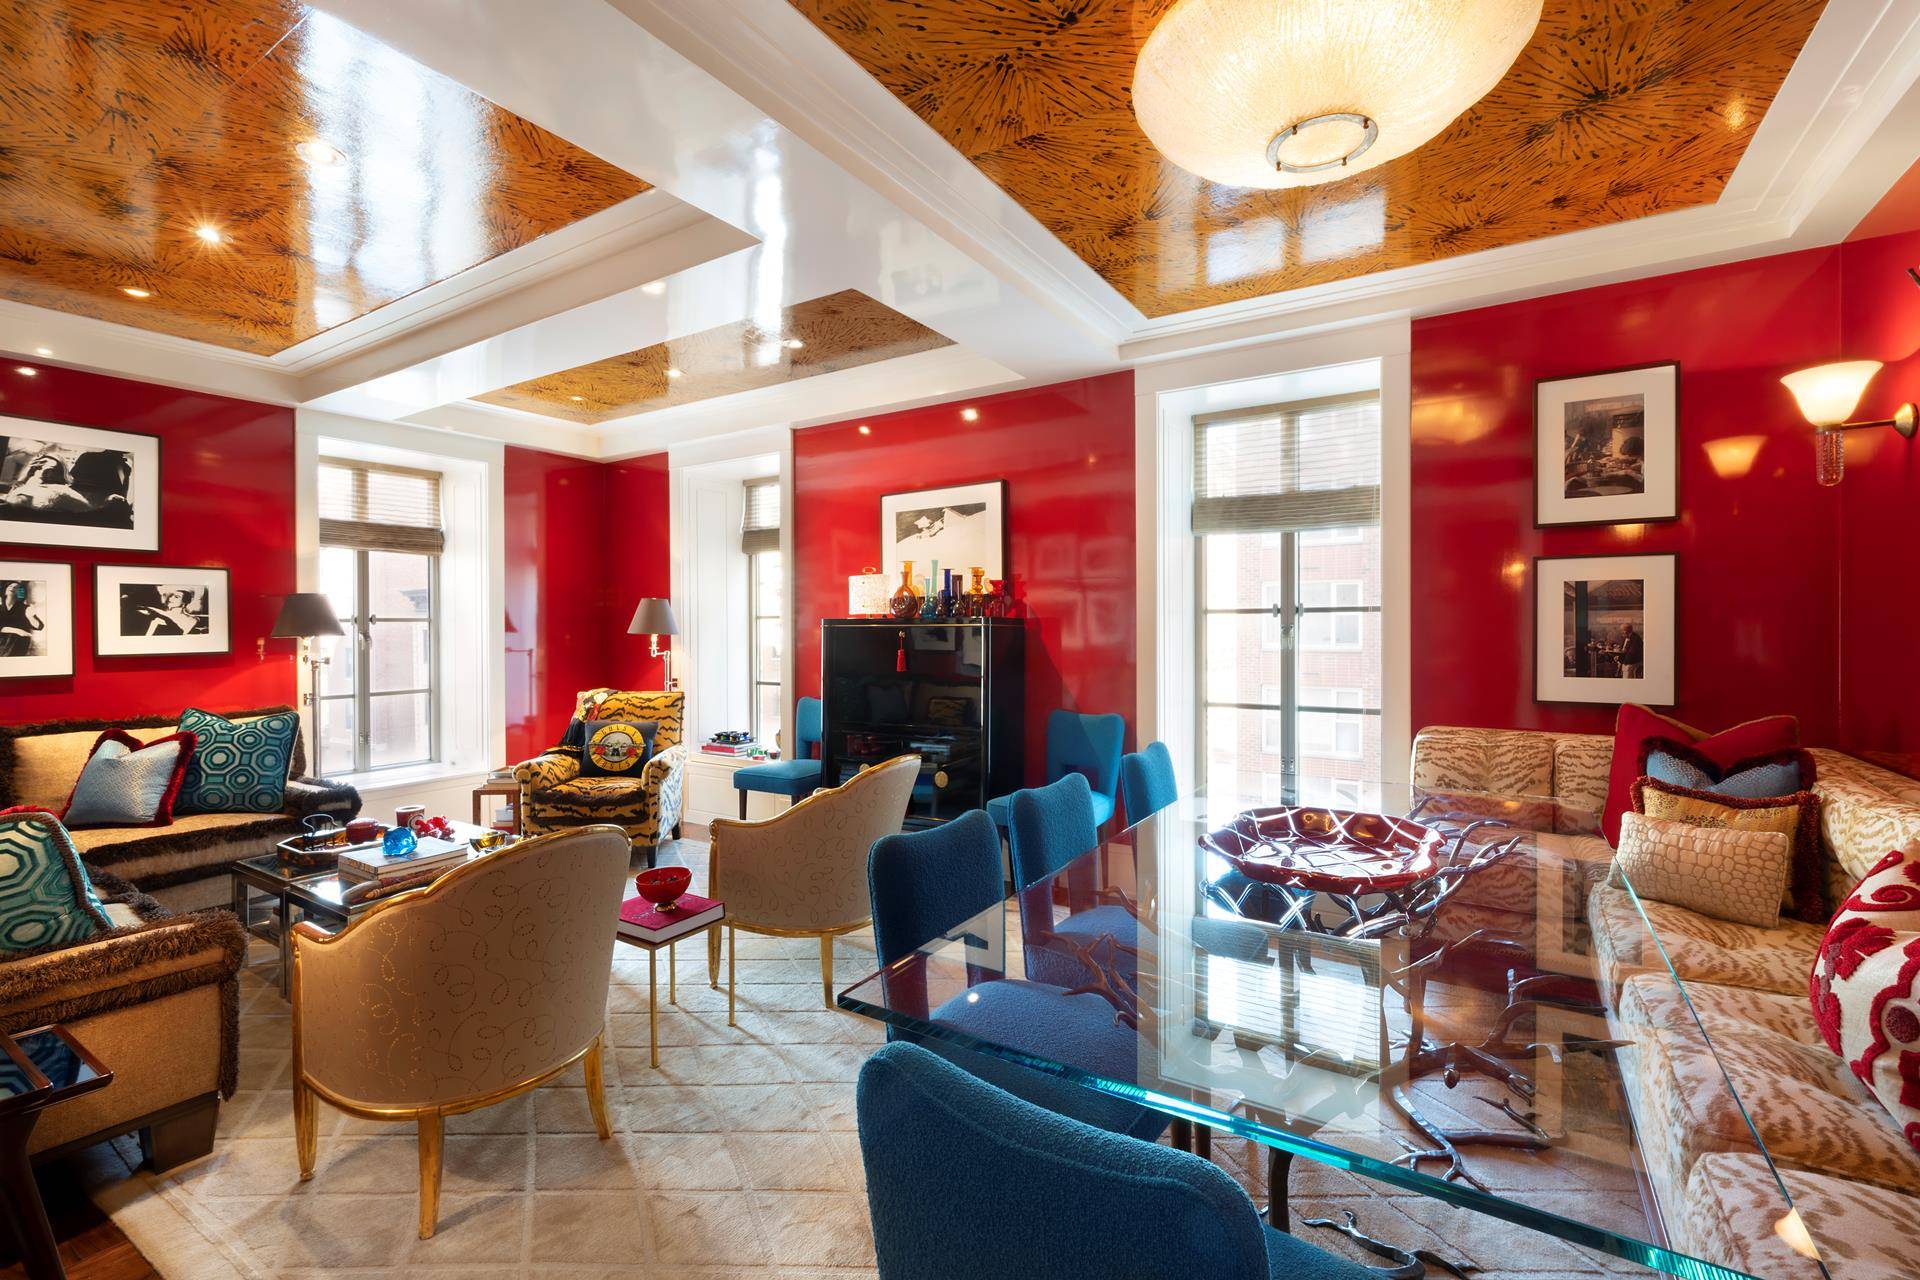 Luscious color and gleaming surfaces turn a city apartment into an alluring jewel box.